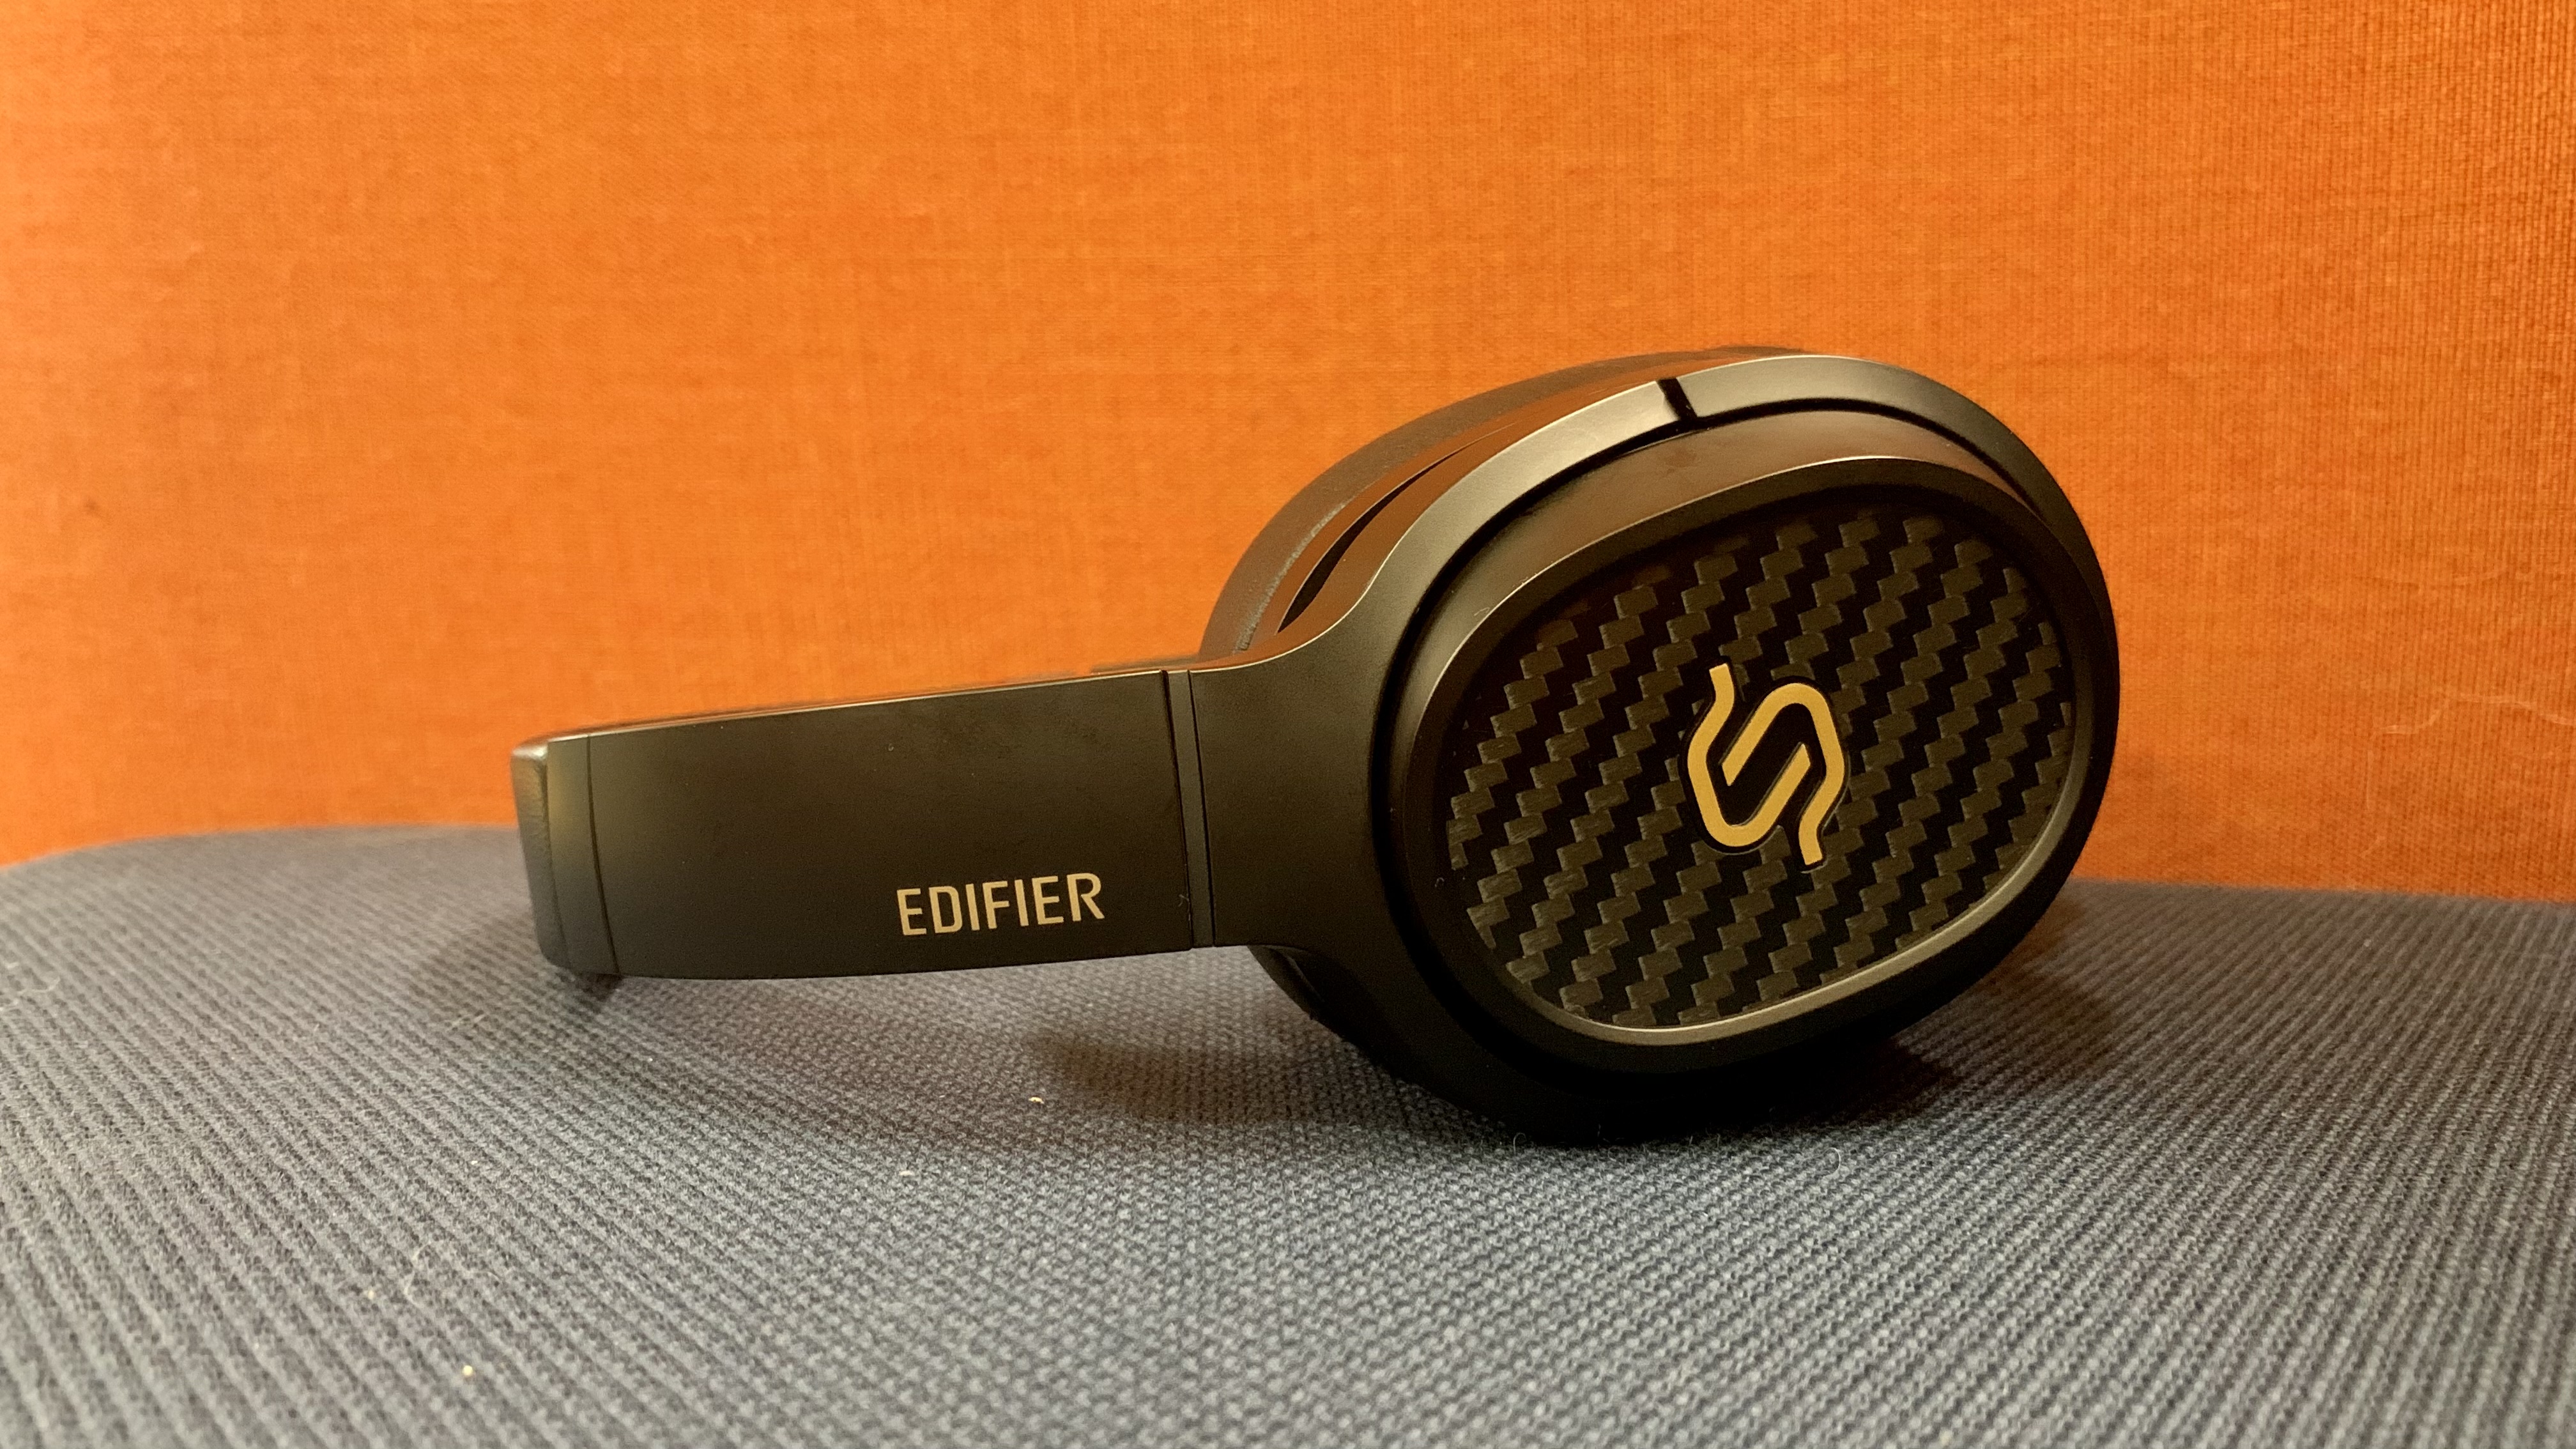 Edifier's new high-end headphones bring top quality at low price [Review]